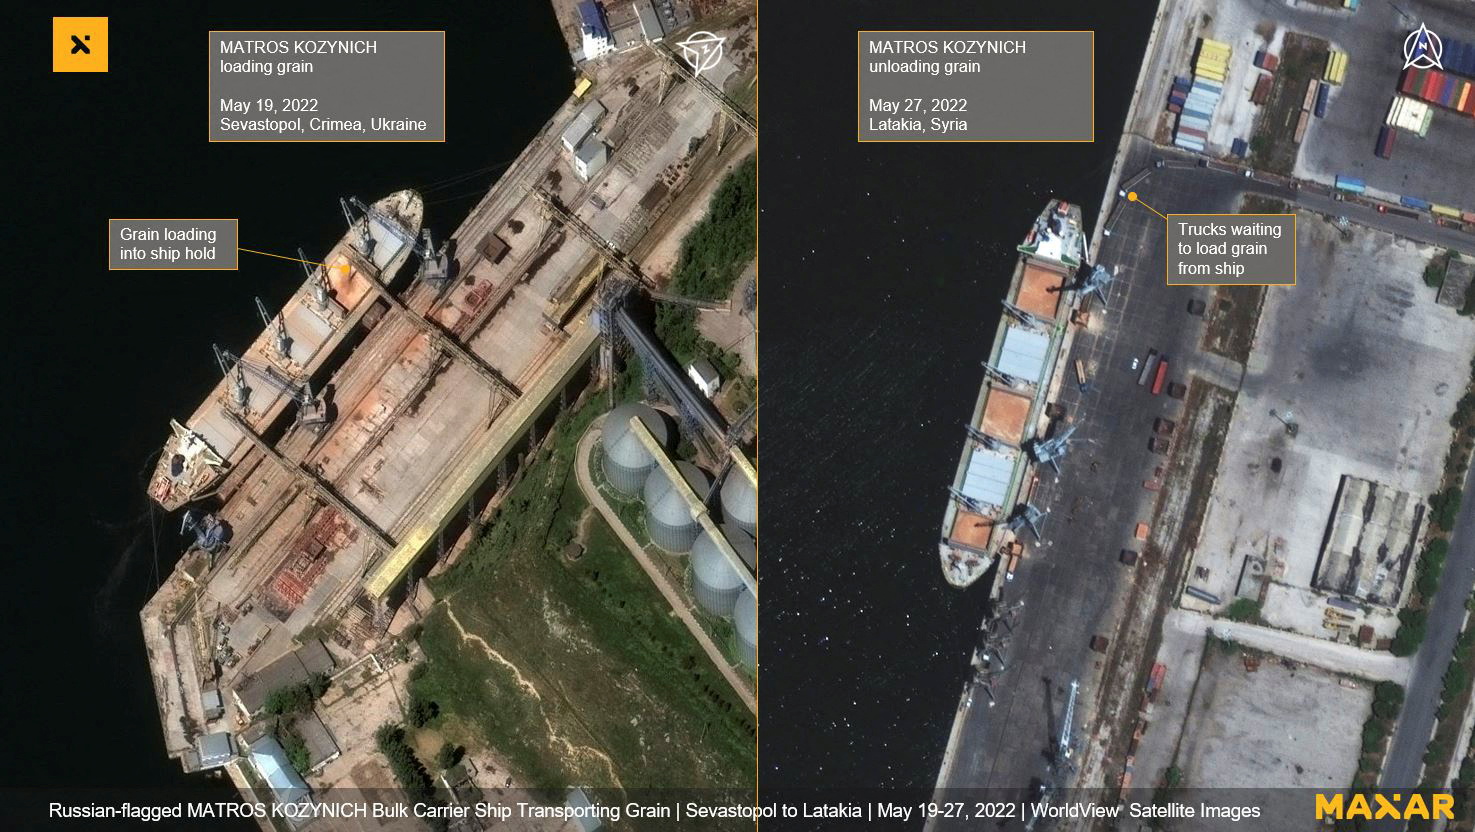 Satellite images show grain being loaded on the Matros Pozynich in Sevastopol and unloaded in Latakia